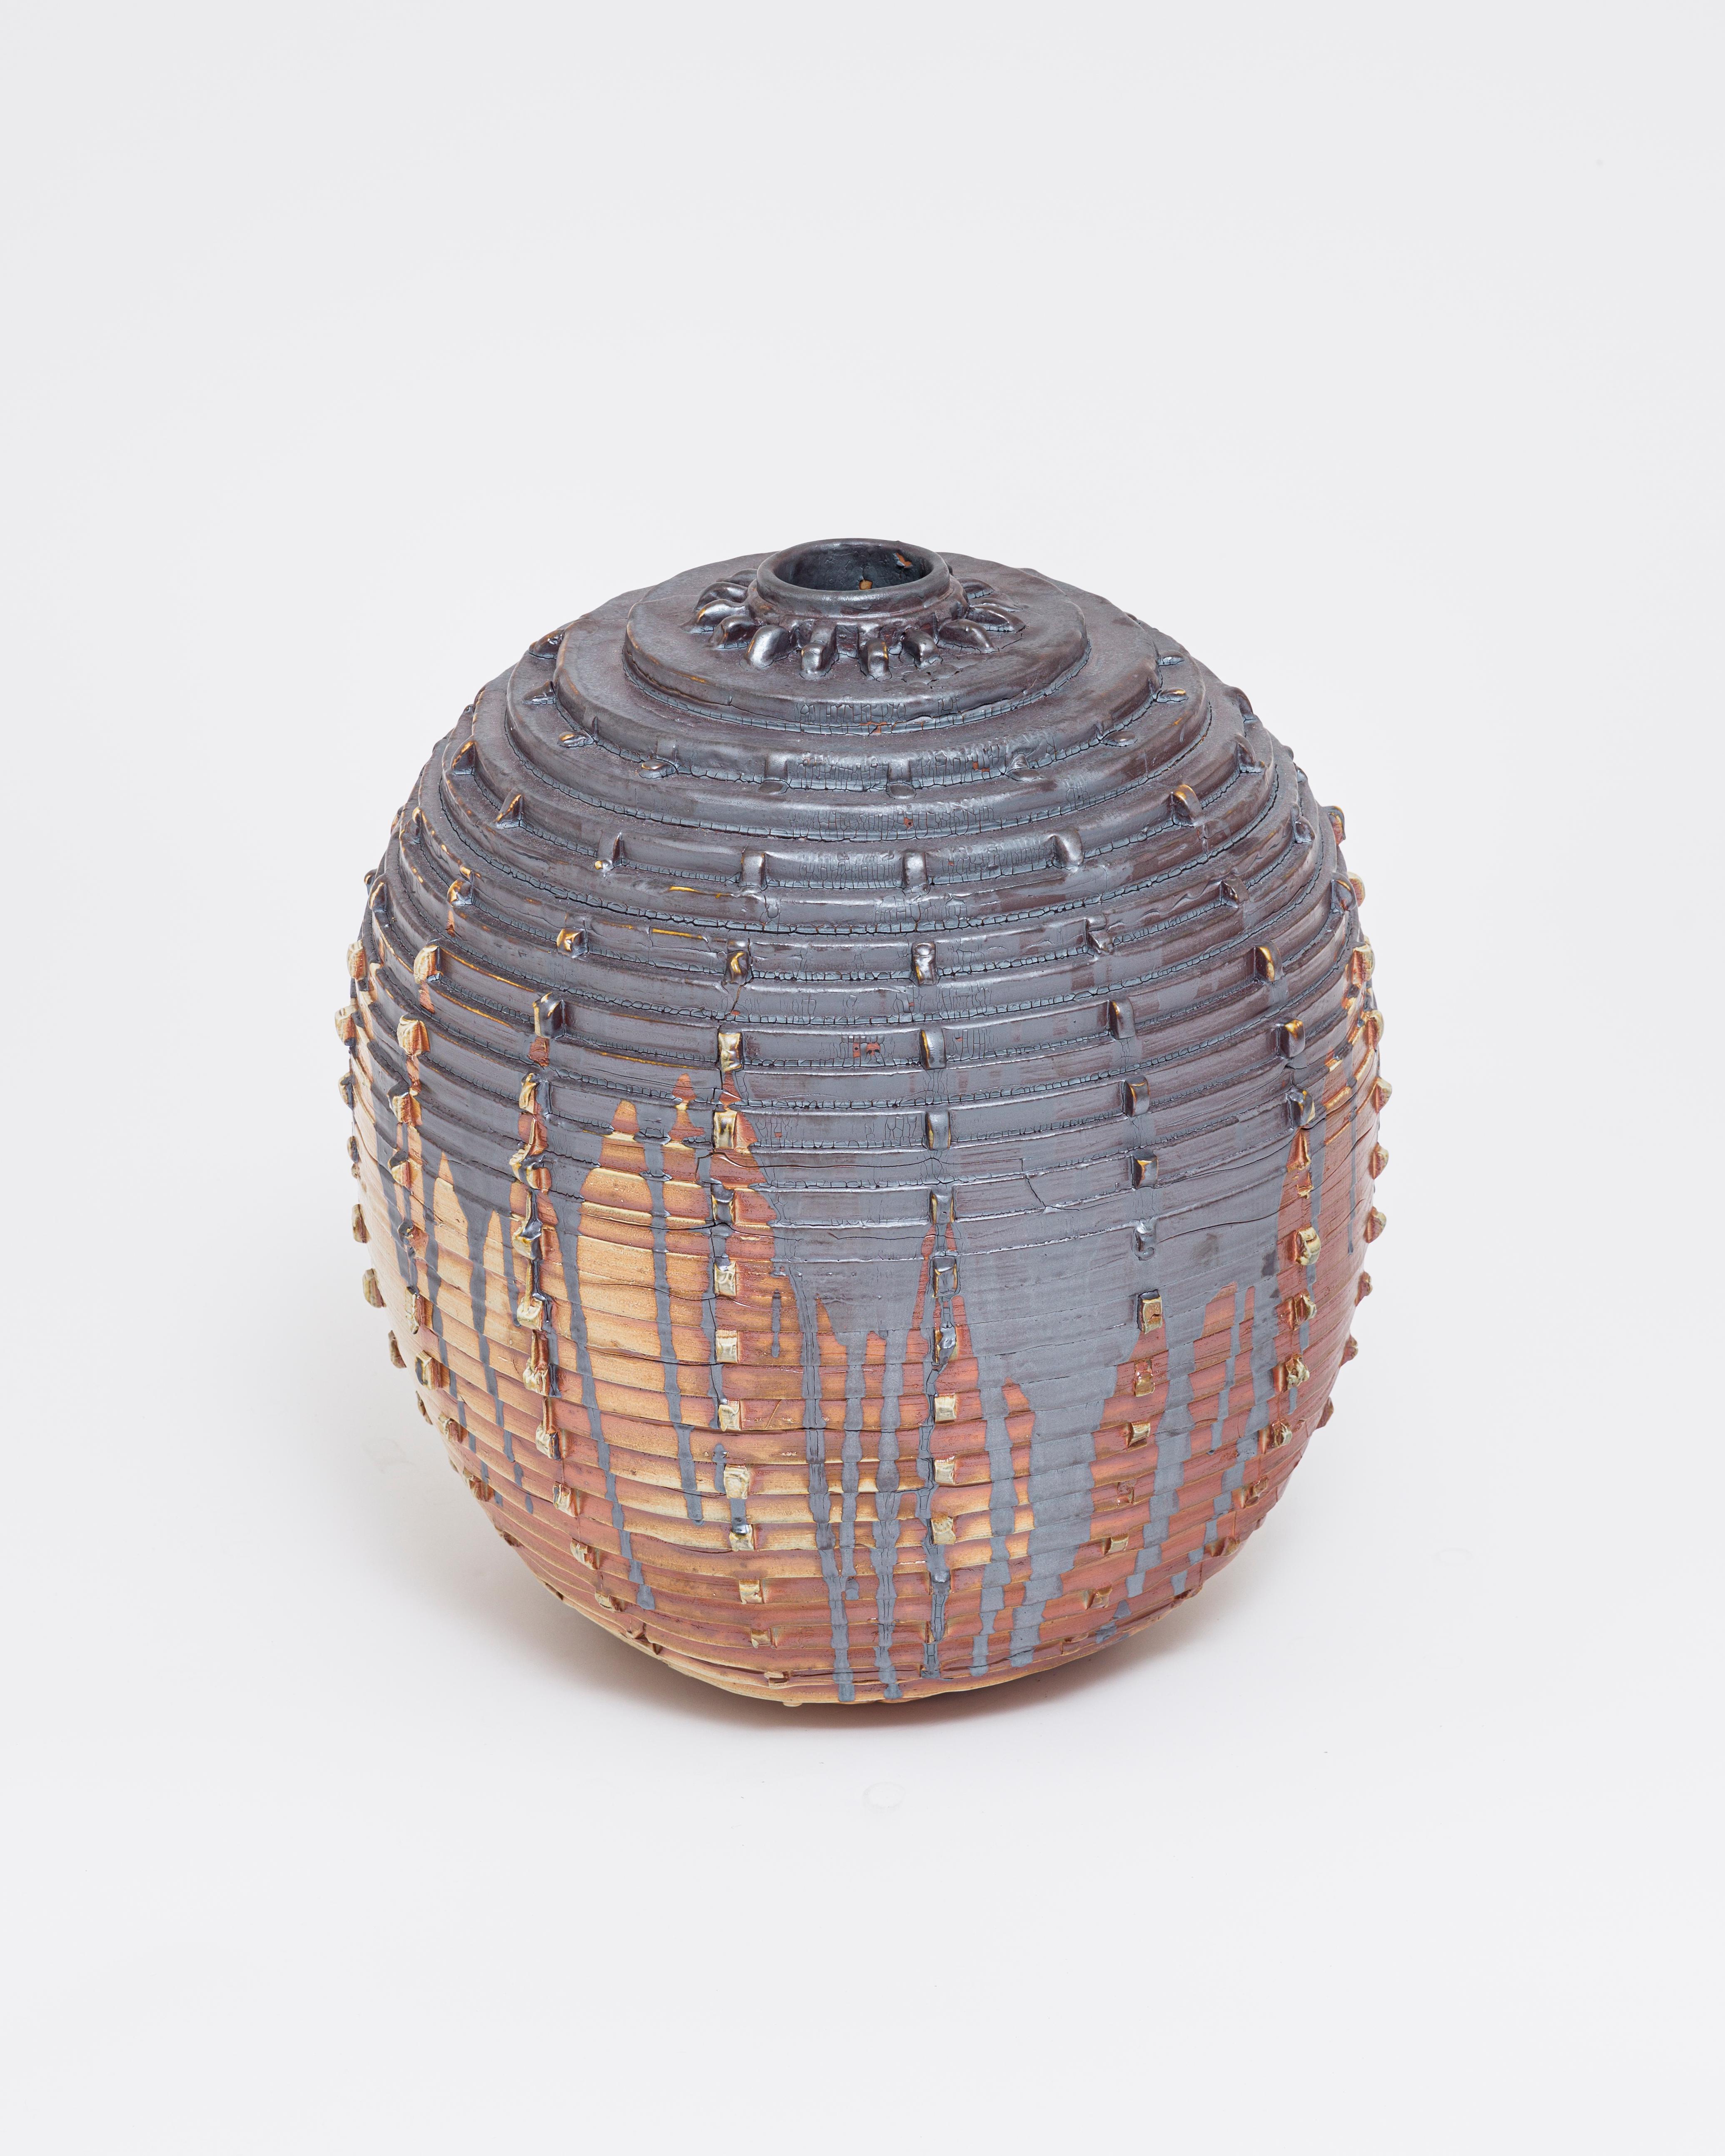 A large-scale decorative and functional (it can hold water) vase. The color comes from a splash of dark brown, almost metallic glaze and the natural wood-fired process. An extremely interesting and sculptural shape. 

About Ellen Pong
Originally